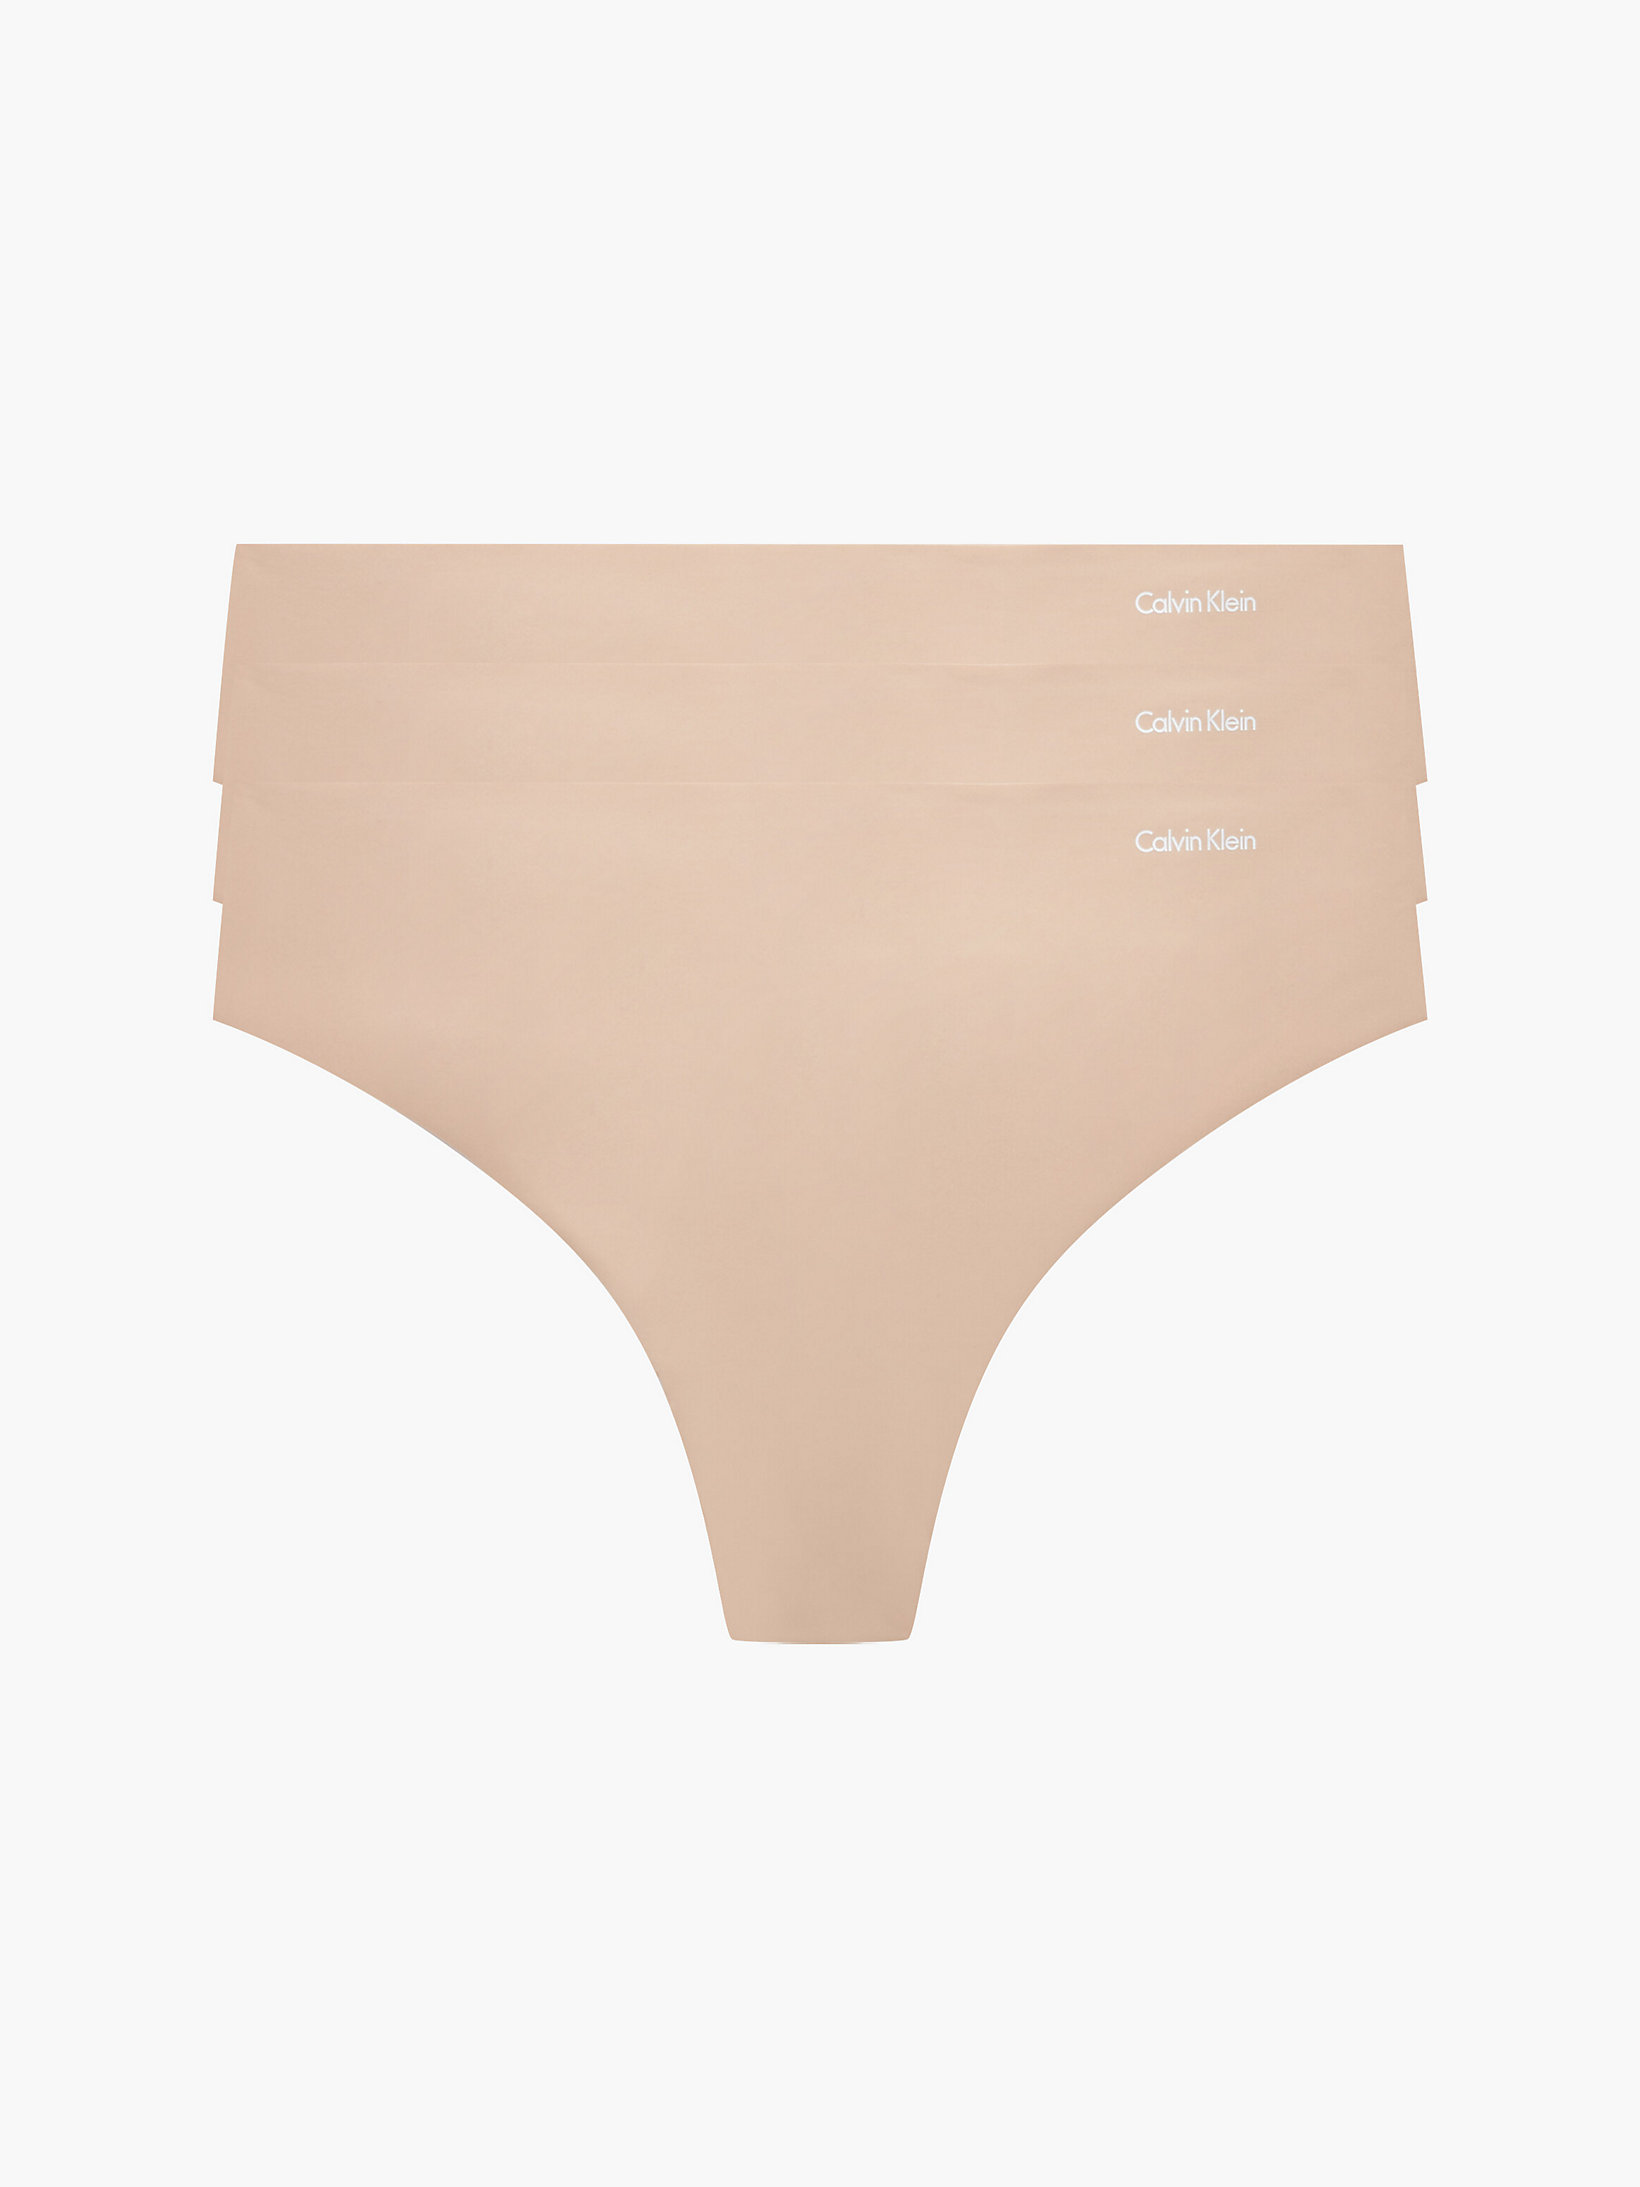 Light Caramel 3 Pack Thongs - Invisibles undefined women Calvin Klein